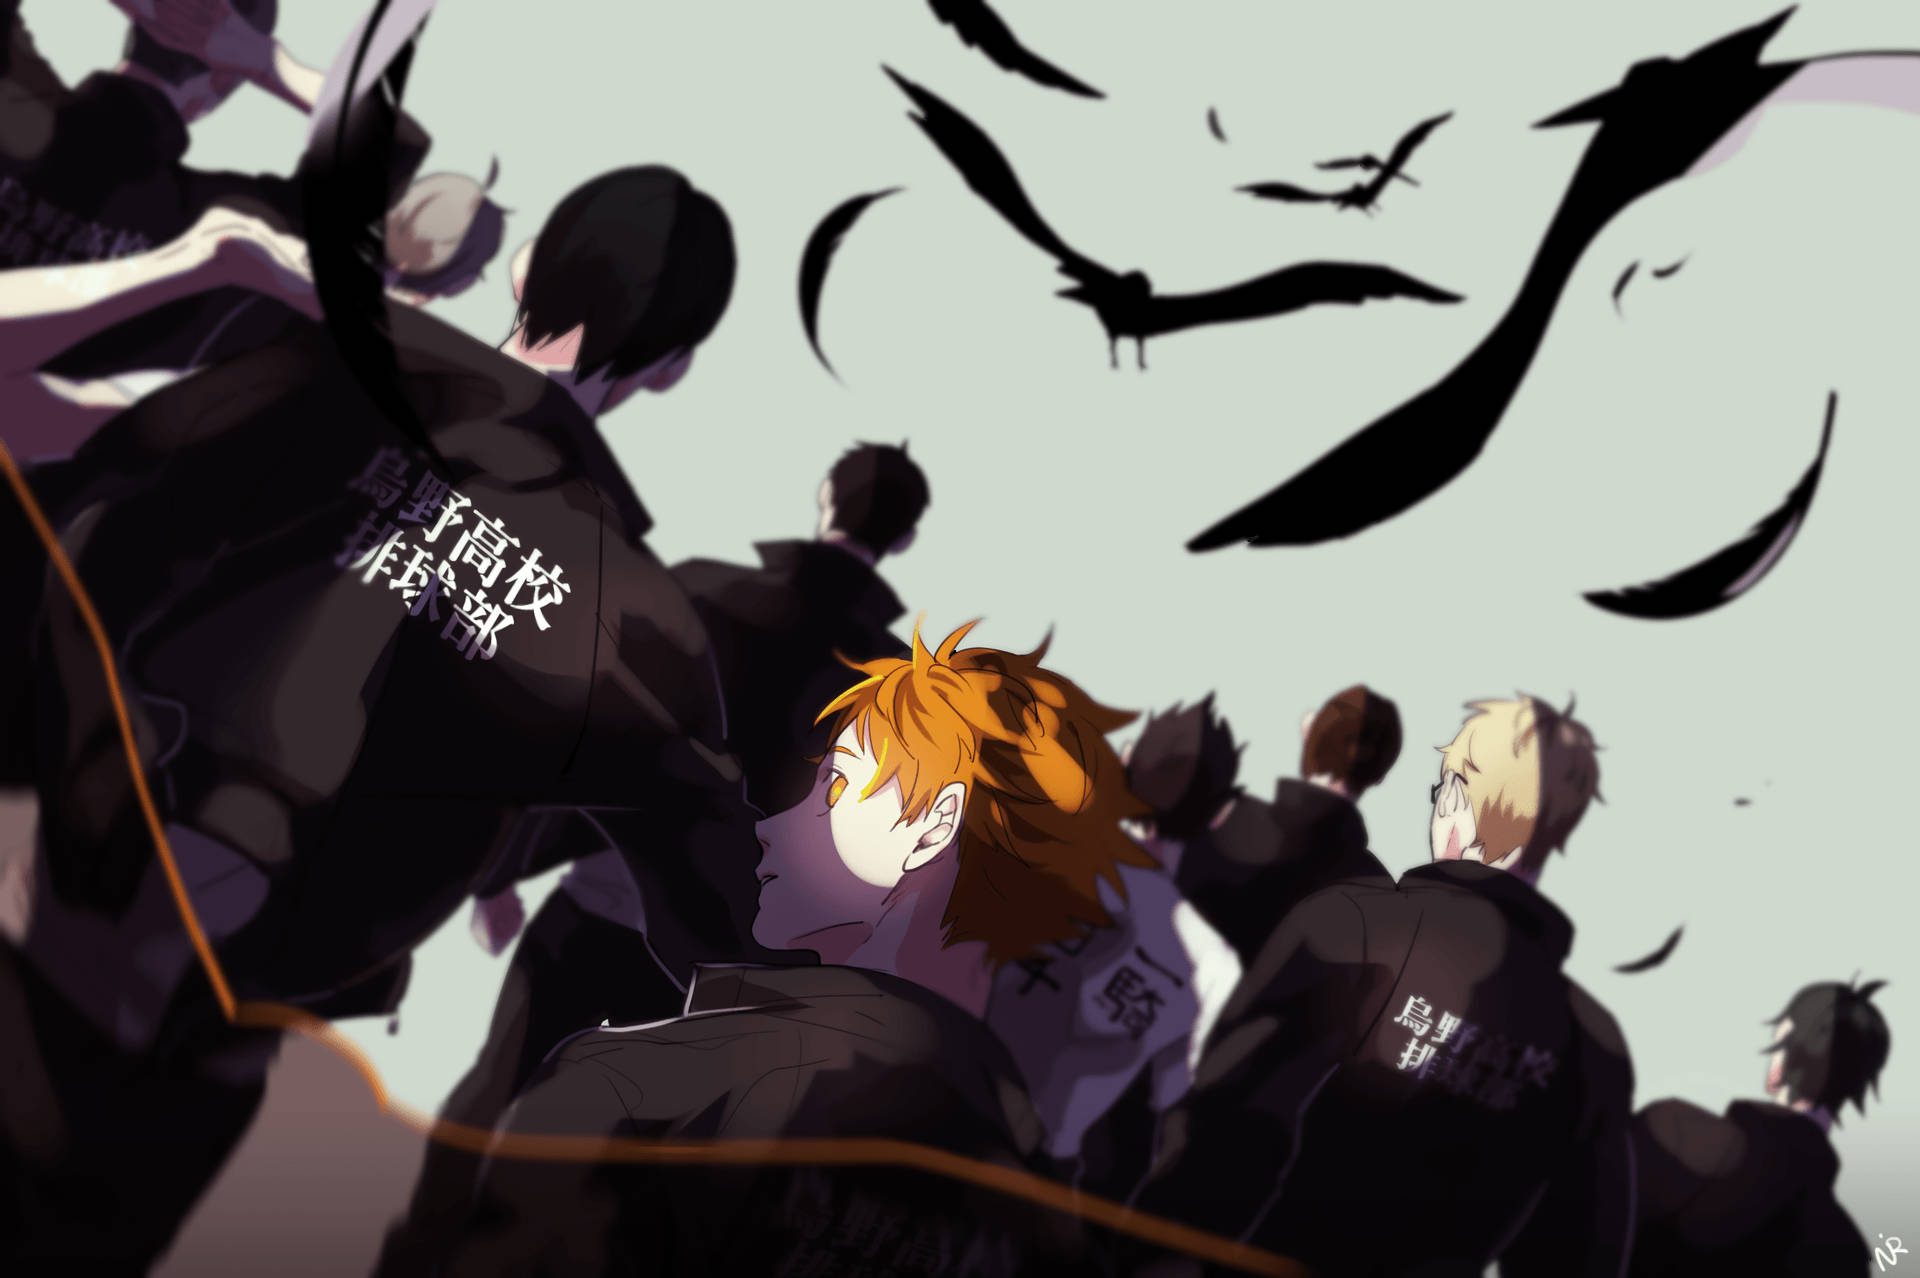 "The brave Hinata Shouyou pushes through any obstacle with a determined spirit" Wallpaper